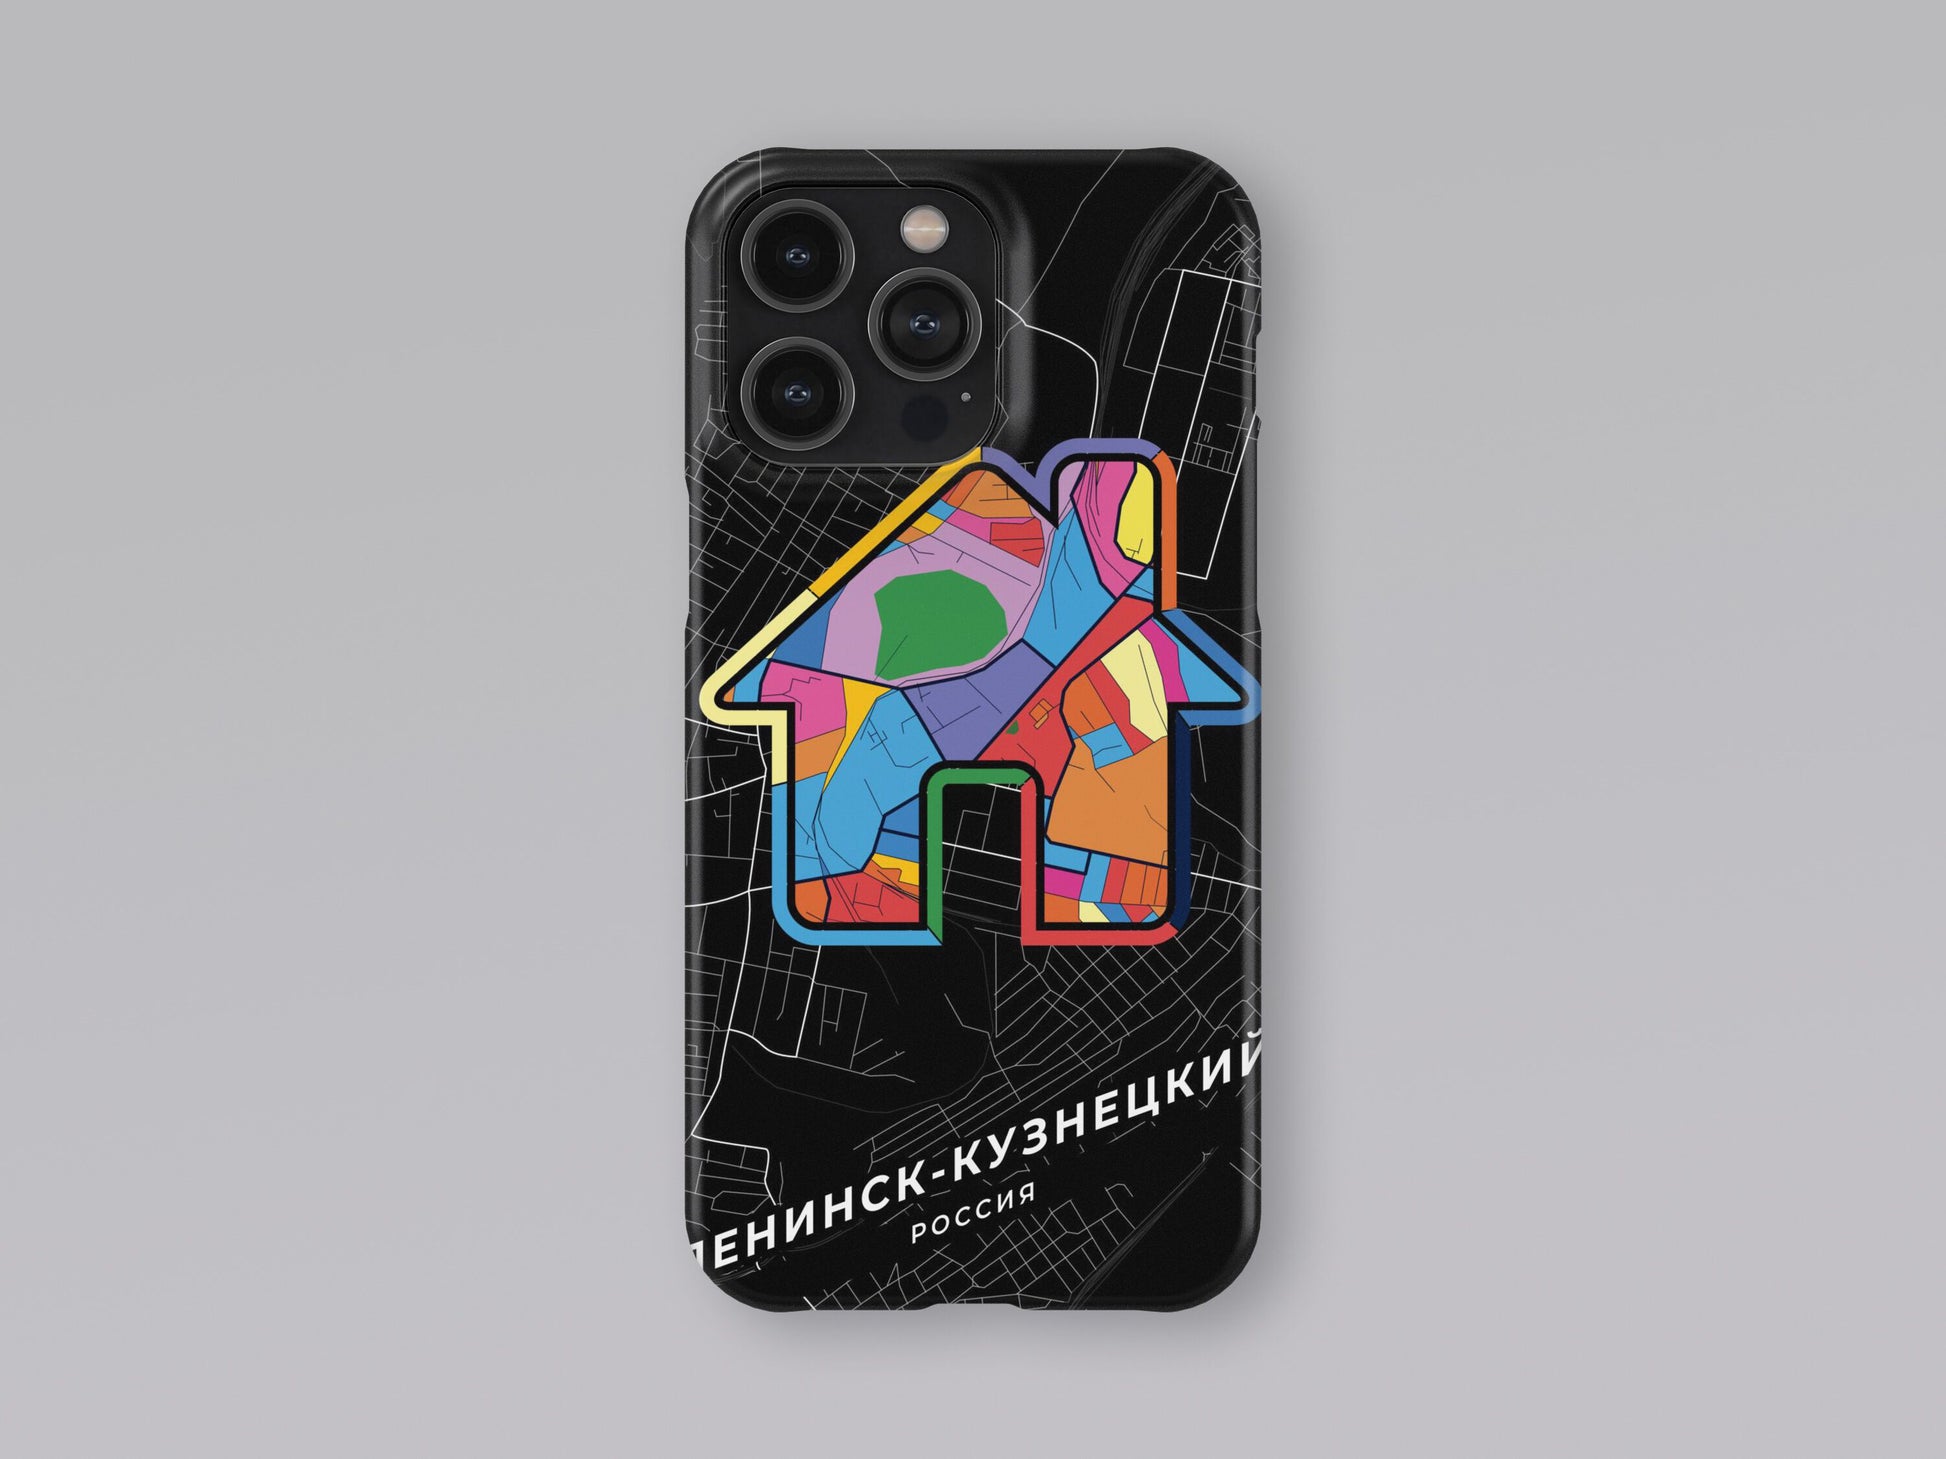 Leninsk-Kuznetsky Russia slim phone case with colorful icon. Birthday, wedding or housewarming gift. Couple match cases. 3